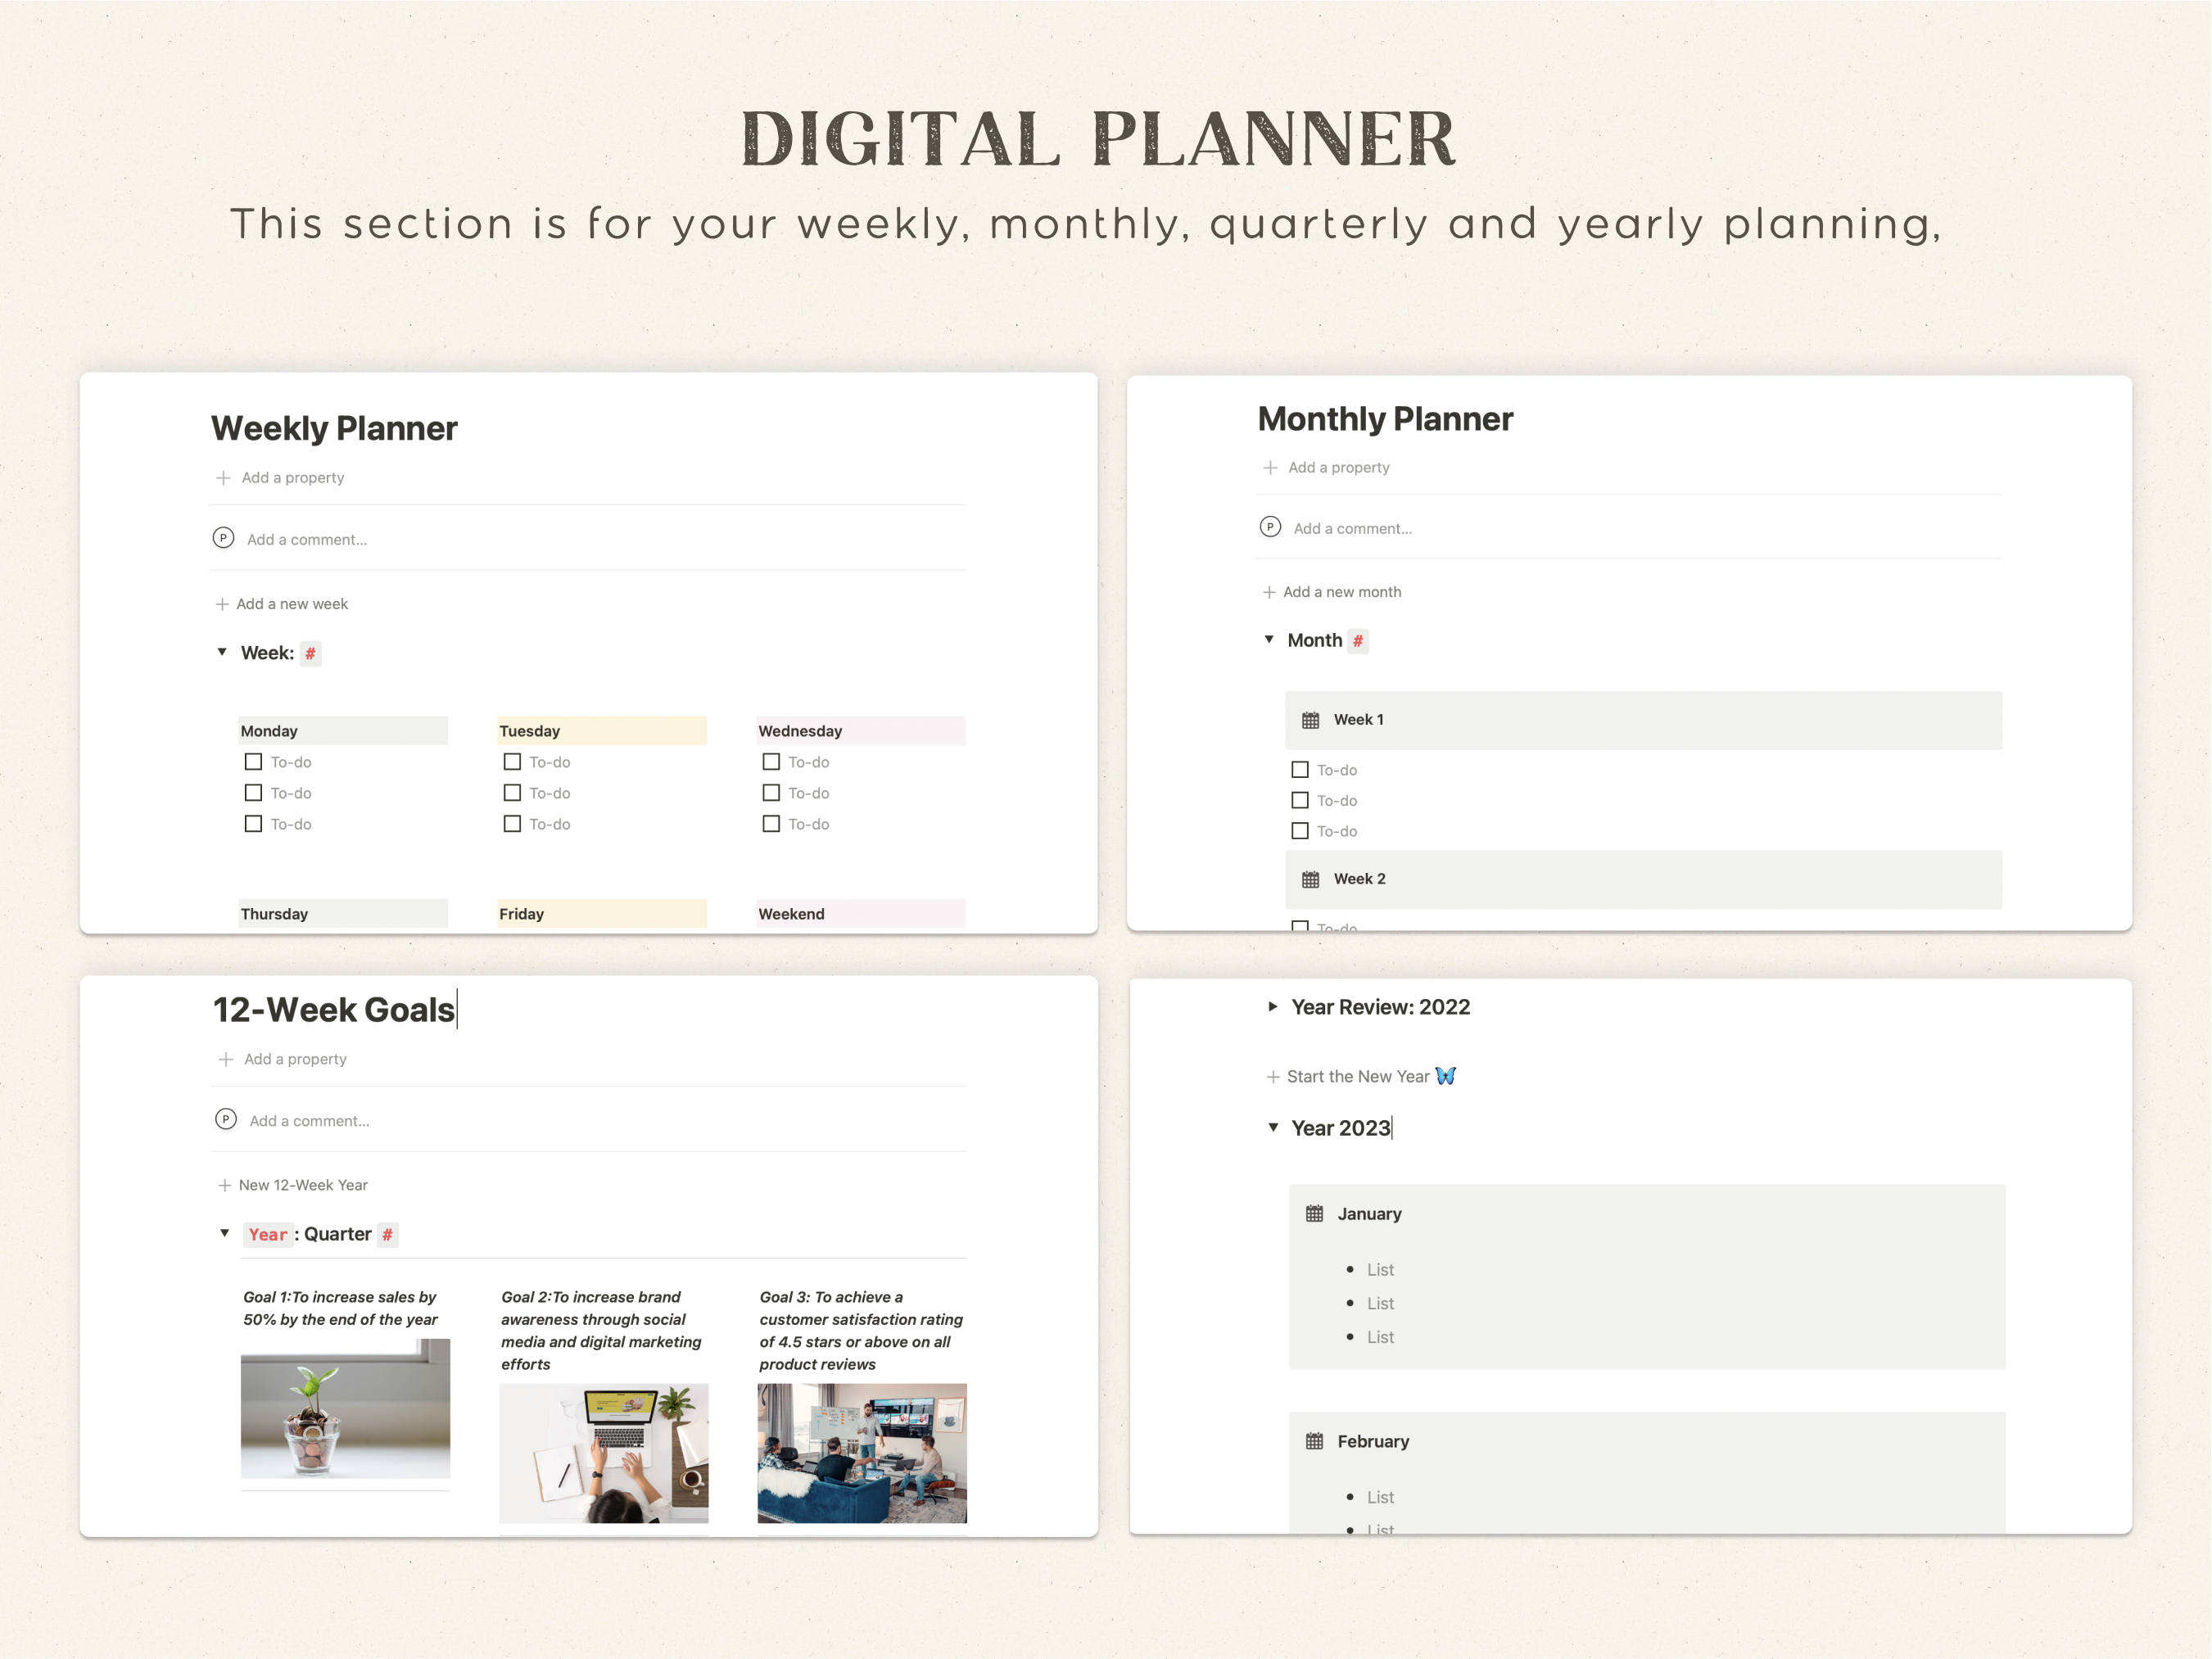 Notion template business planner with content calendar and social media planner